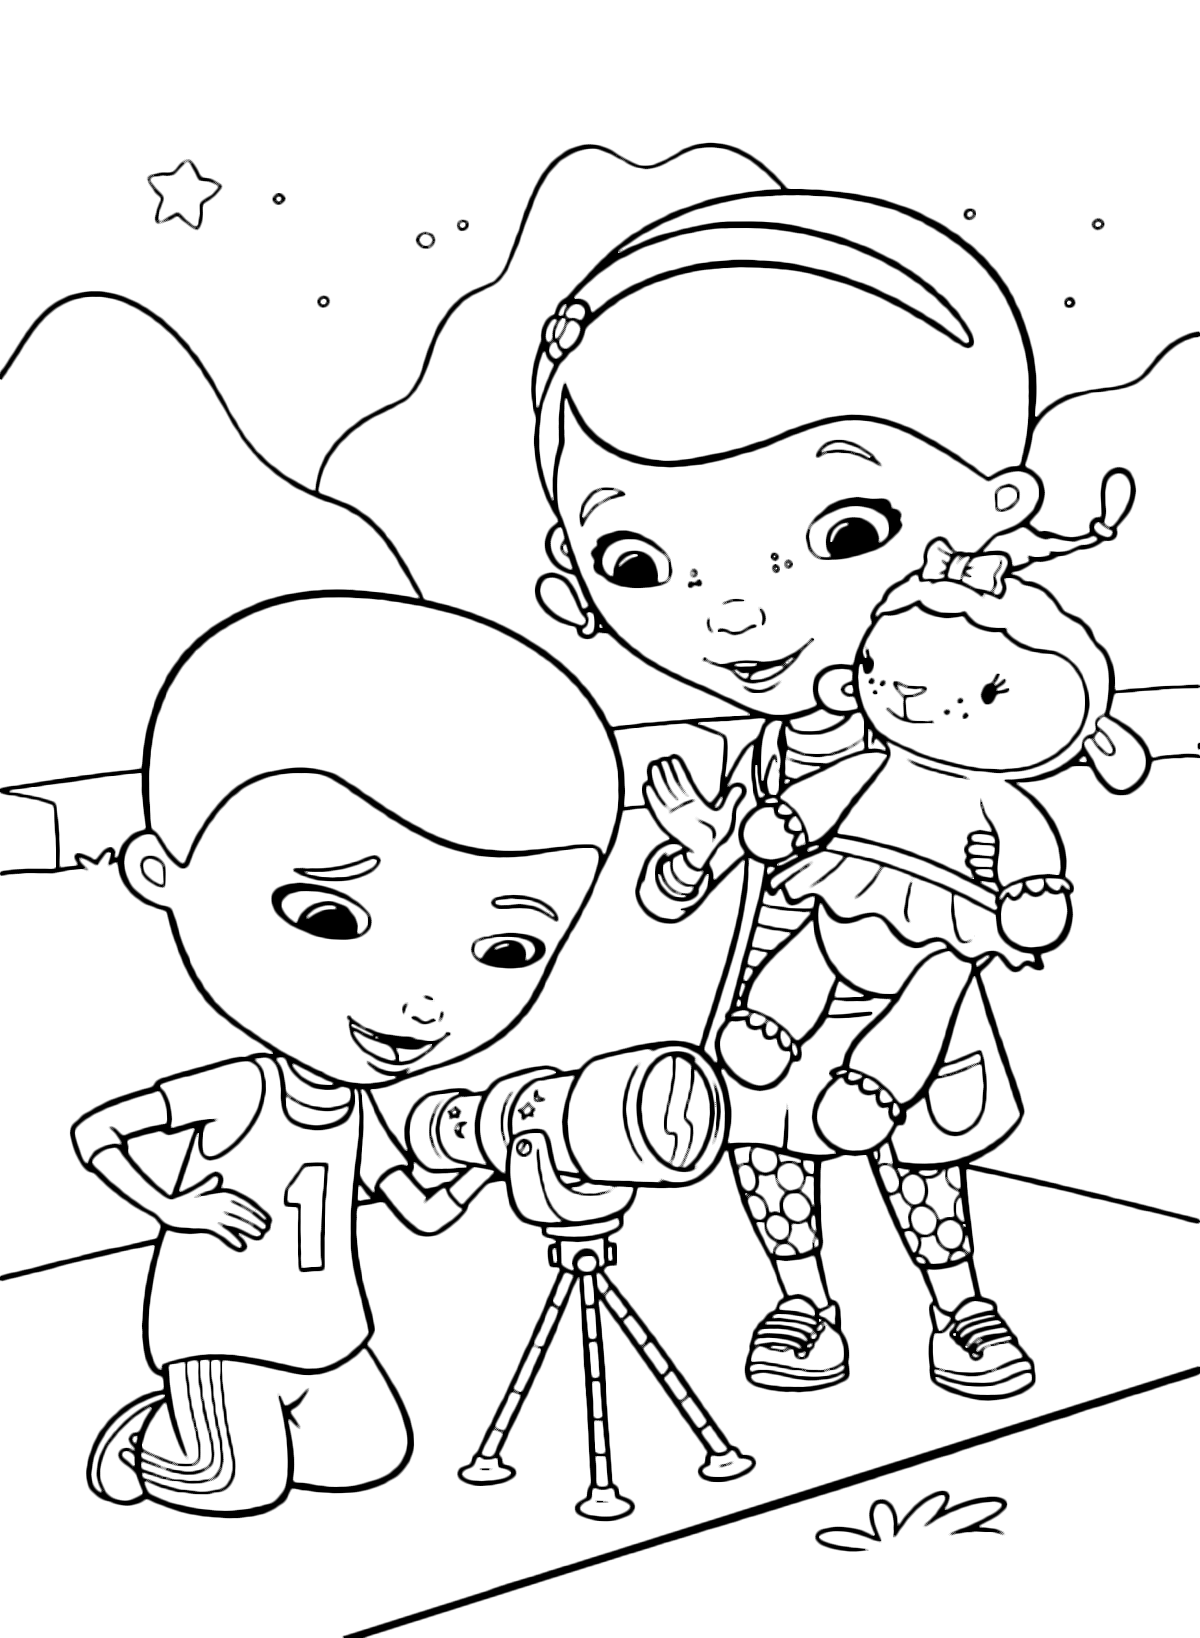 Doc McStuffins - Dotti looks her brother Donny using the telescope Aurora